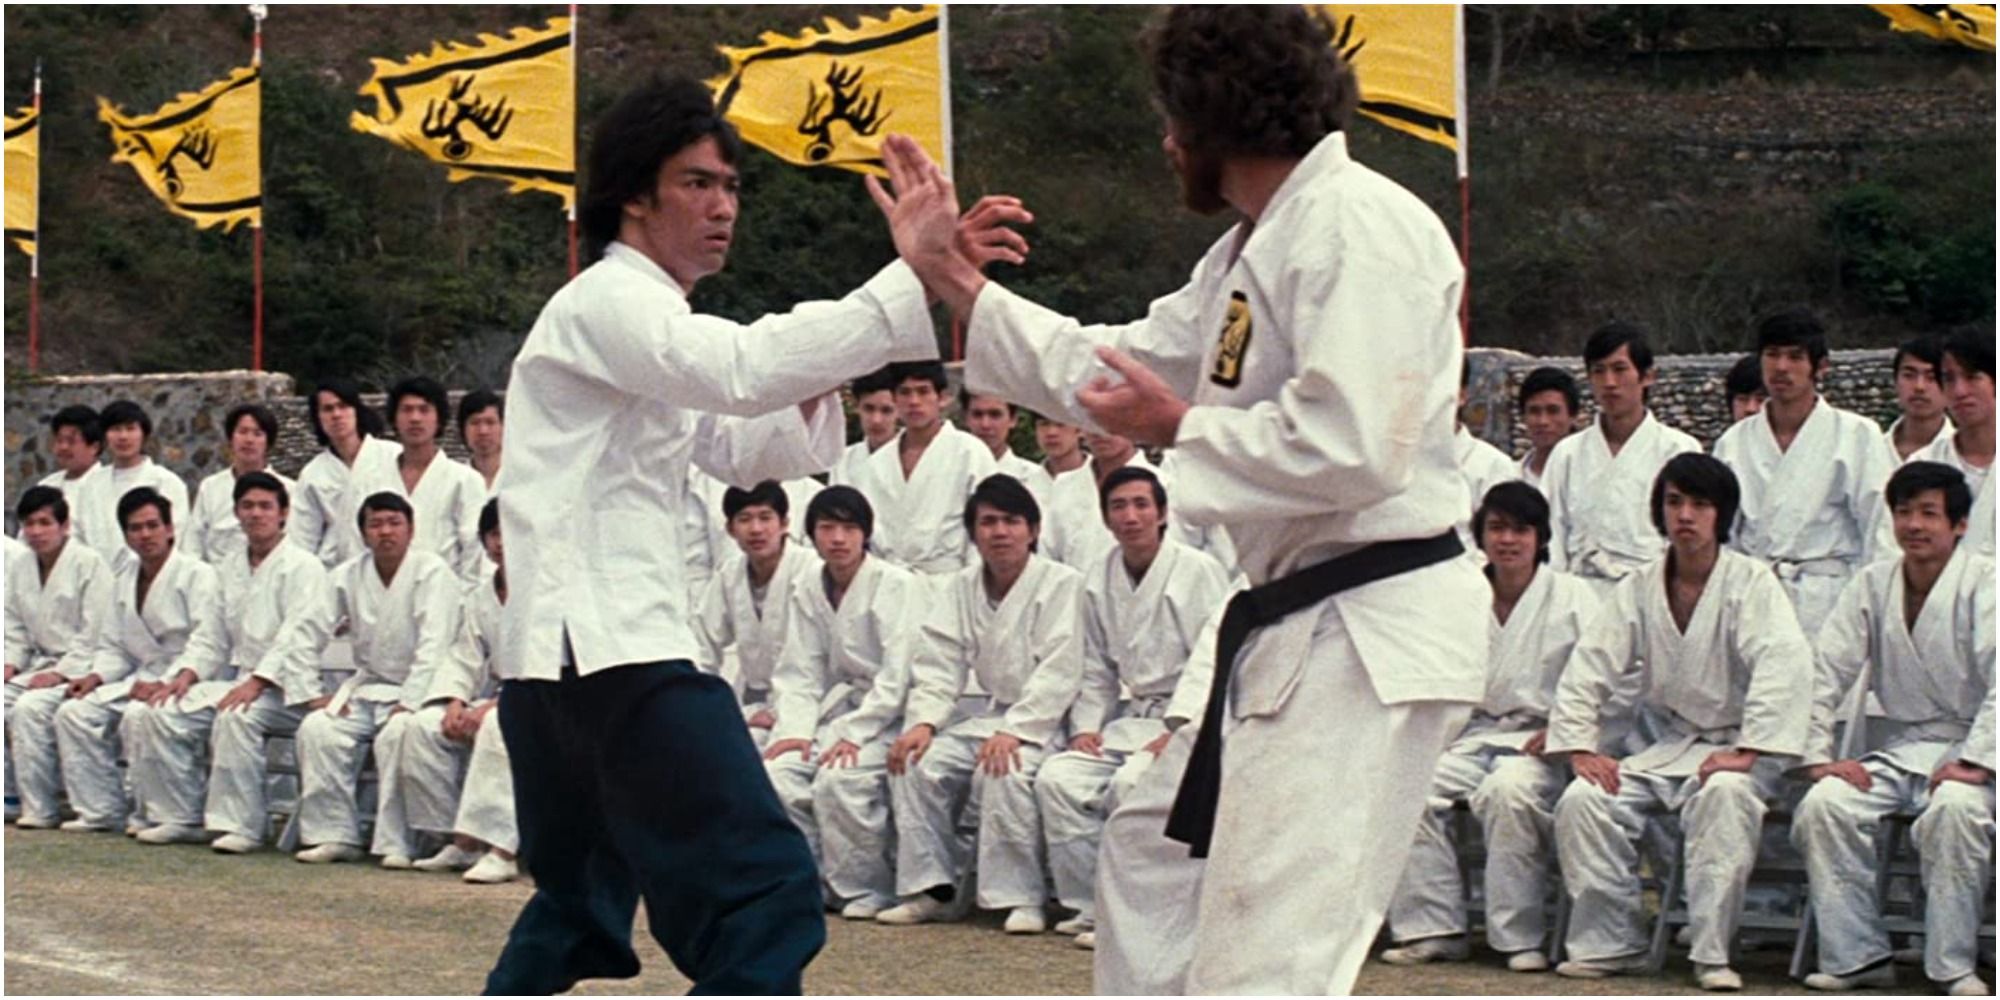 Bruce Lee's First Kung Fu Style Was Tai Chi - TAMA Martial Arts